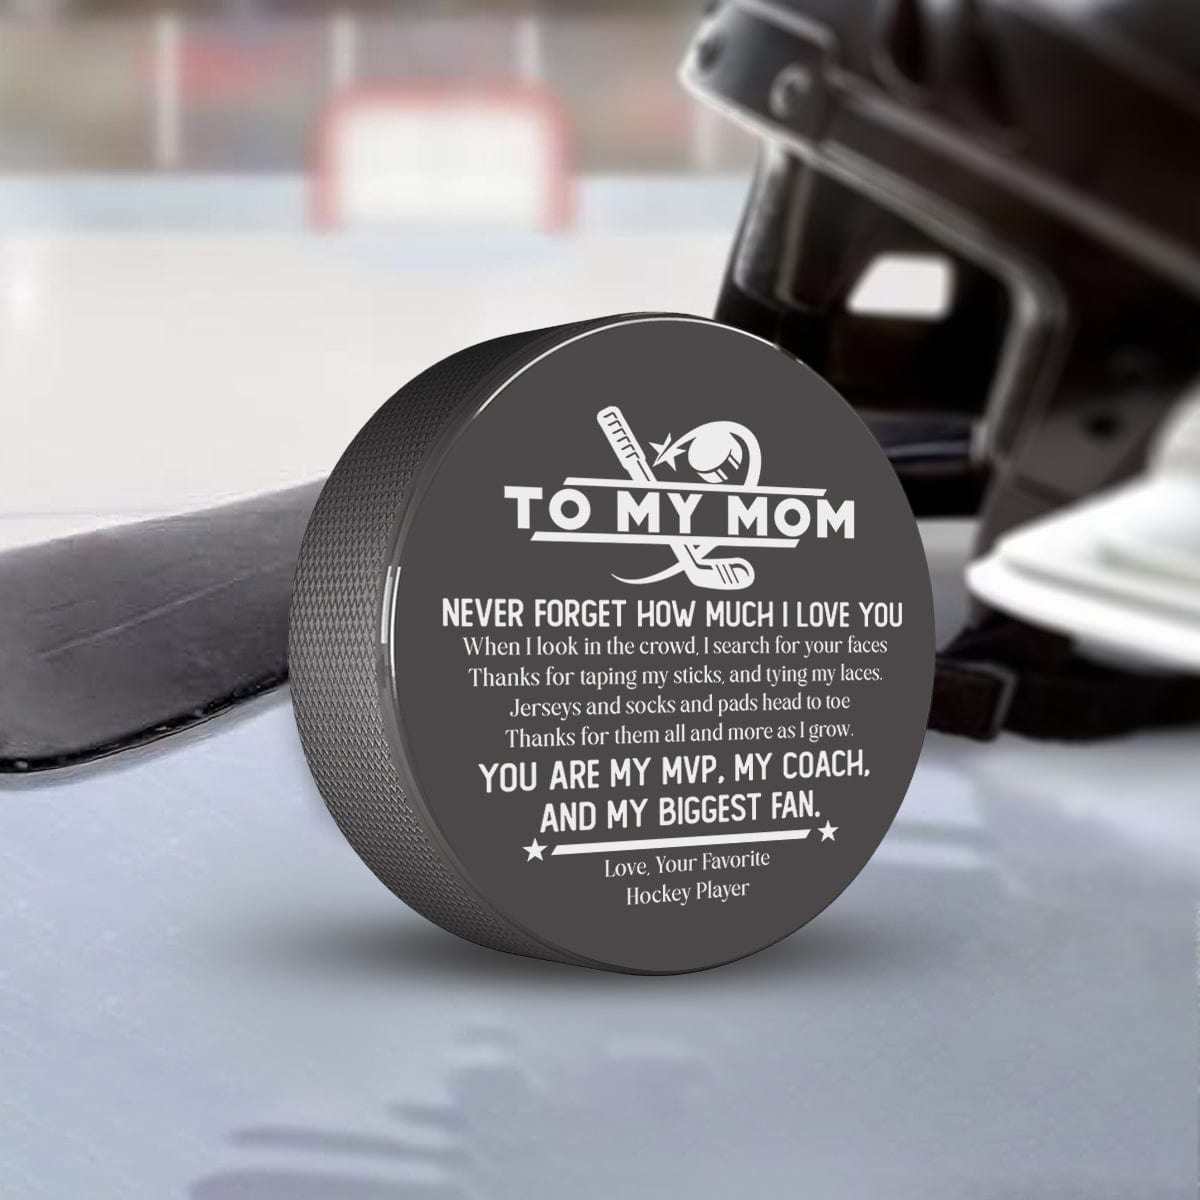 Hockey Puck - Hockey - To My Mom - Thanks For Them All And More As I Grow - Gai19024